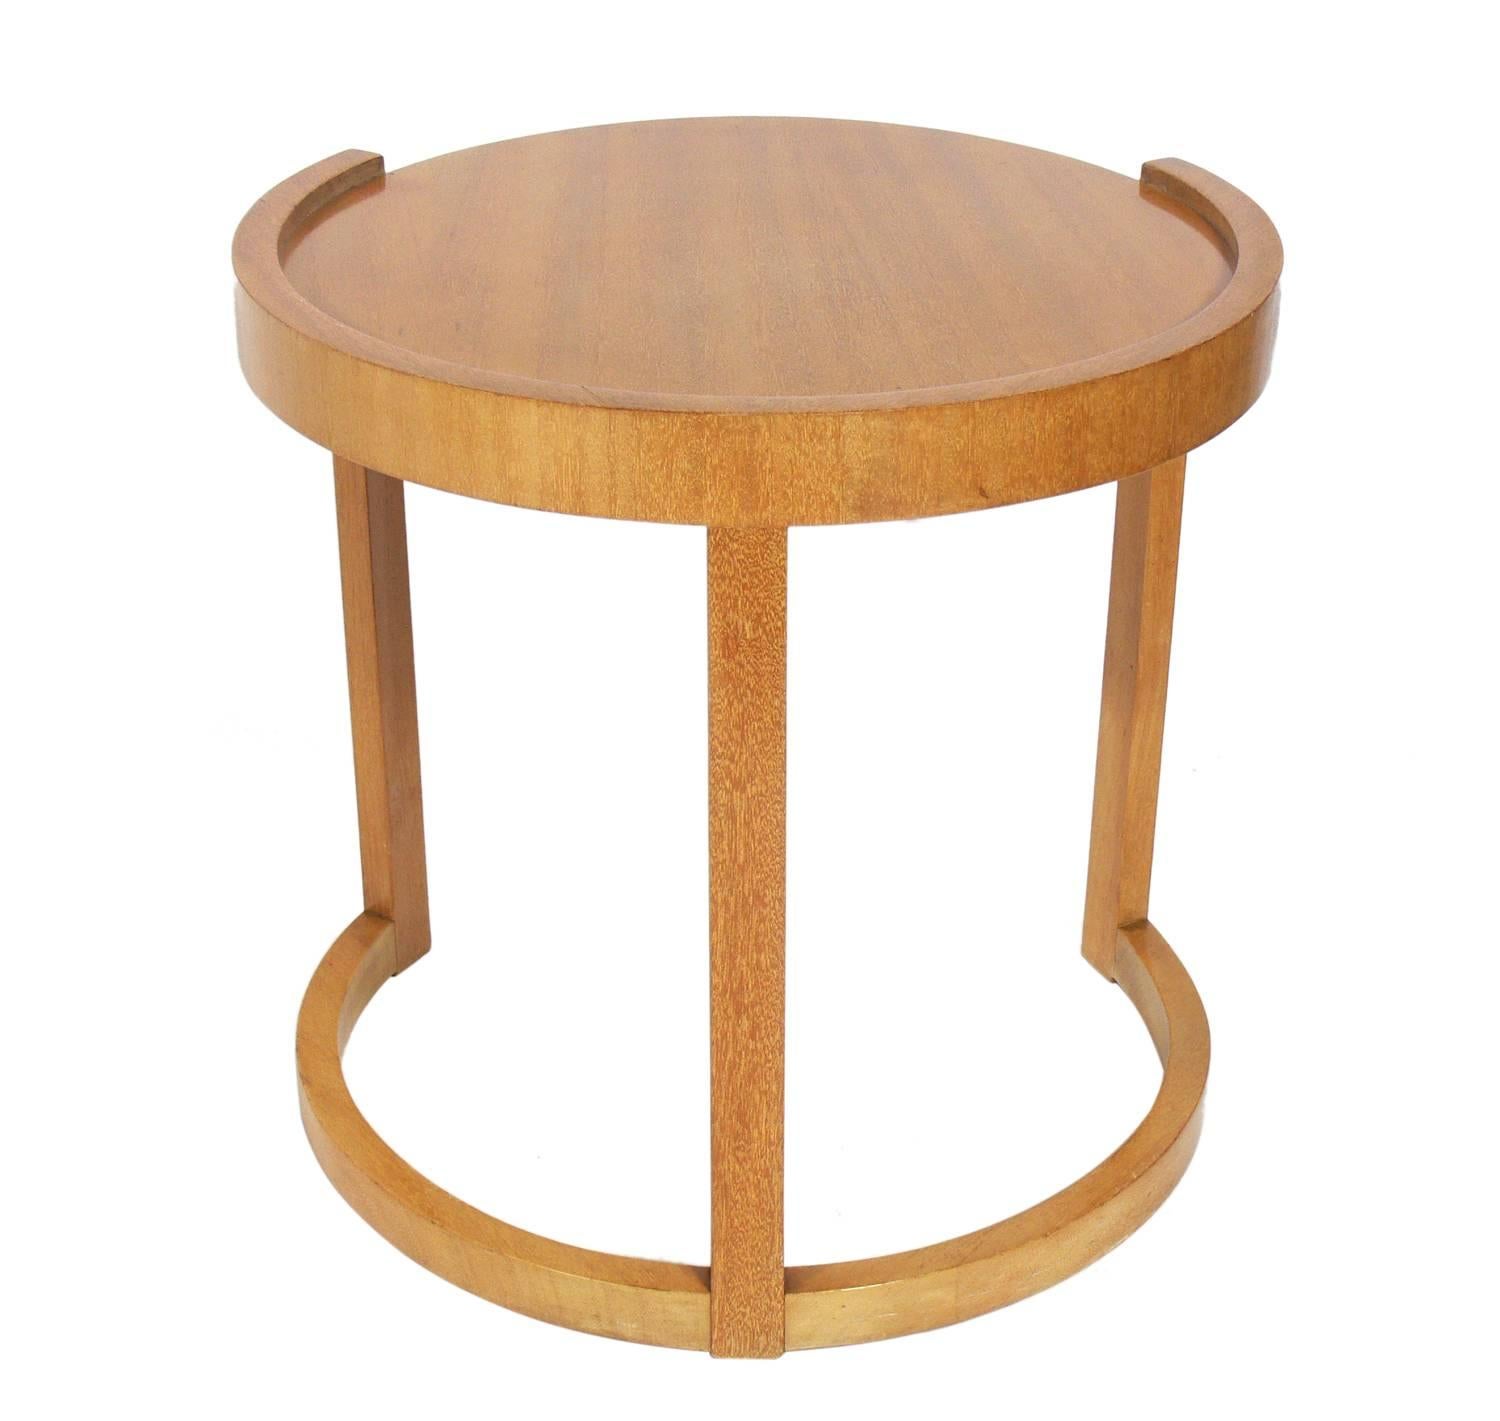 Mid-Century Modern Sculptural Side or Center Table by Paul Laszlo for Brown Saltman